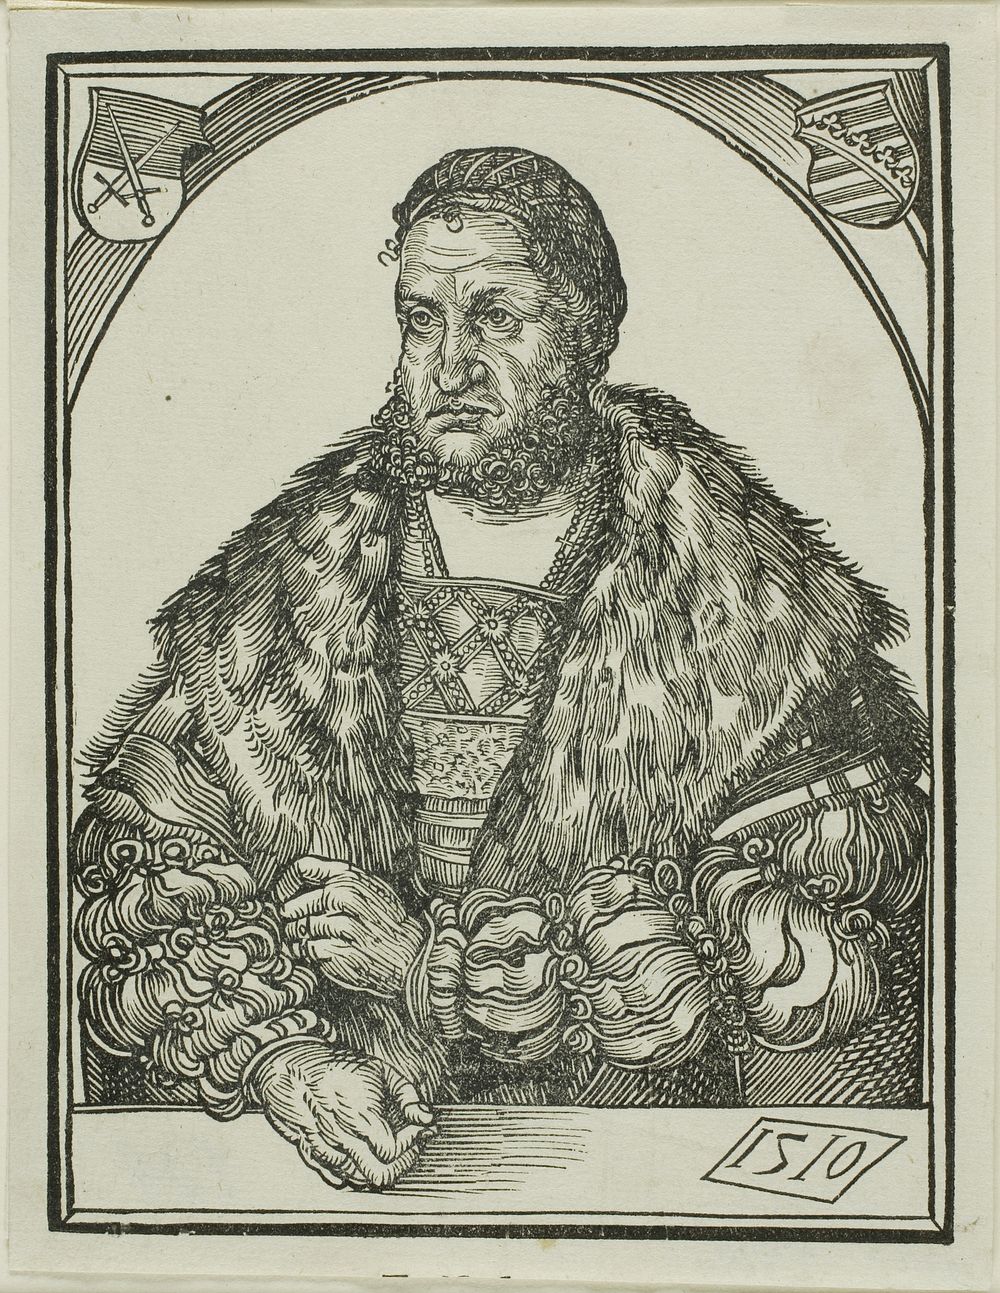 Elector Frederick III of Saxony, from Speculum intellectuale felicitatis humane by Wolf Traut (Unknown Role)